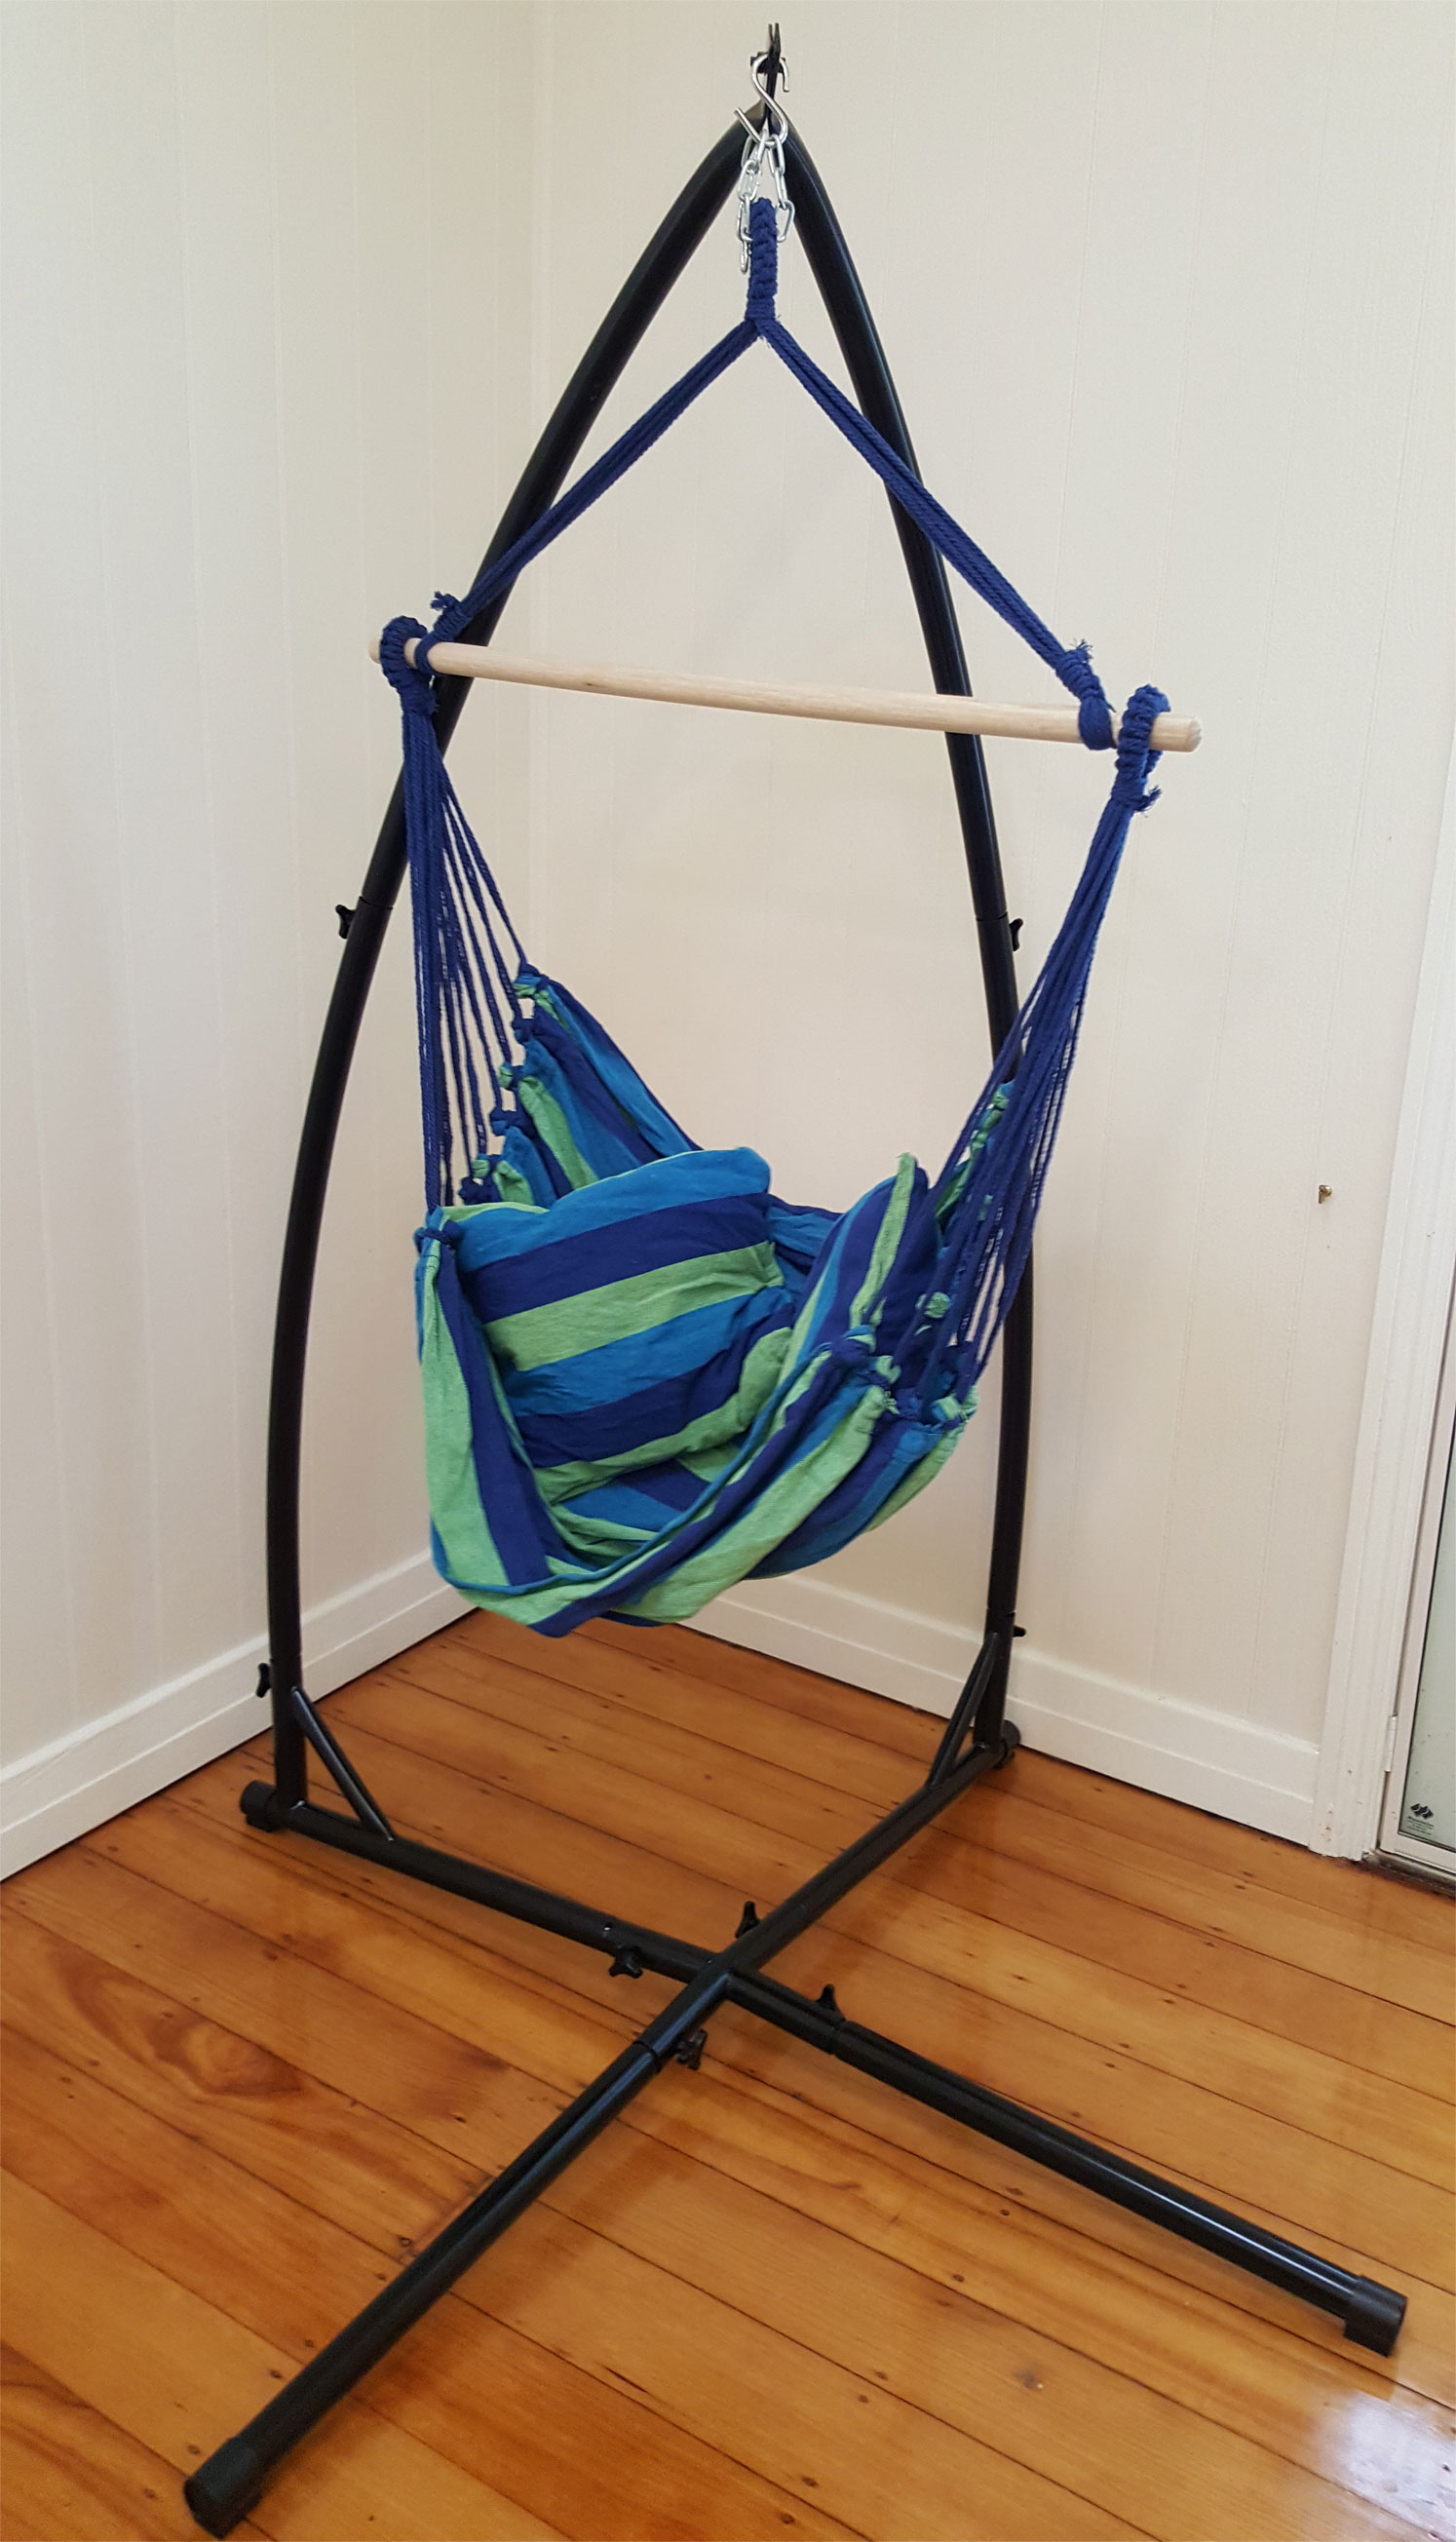 Blue Padded Hammock Chair With Pillows With Stand - Heavenly Hammocks